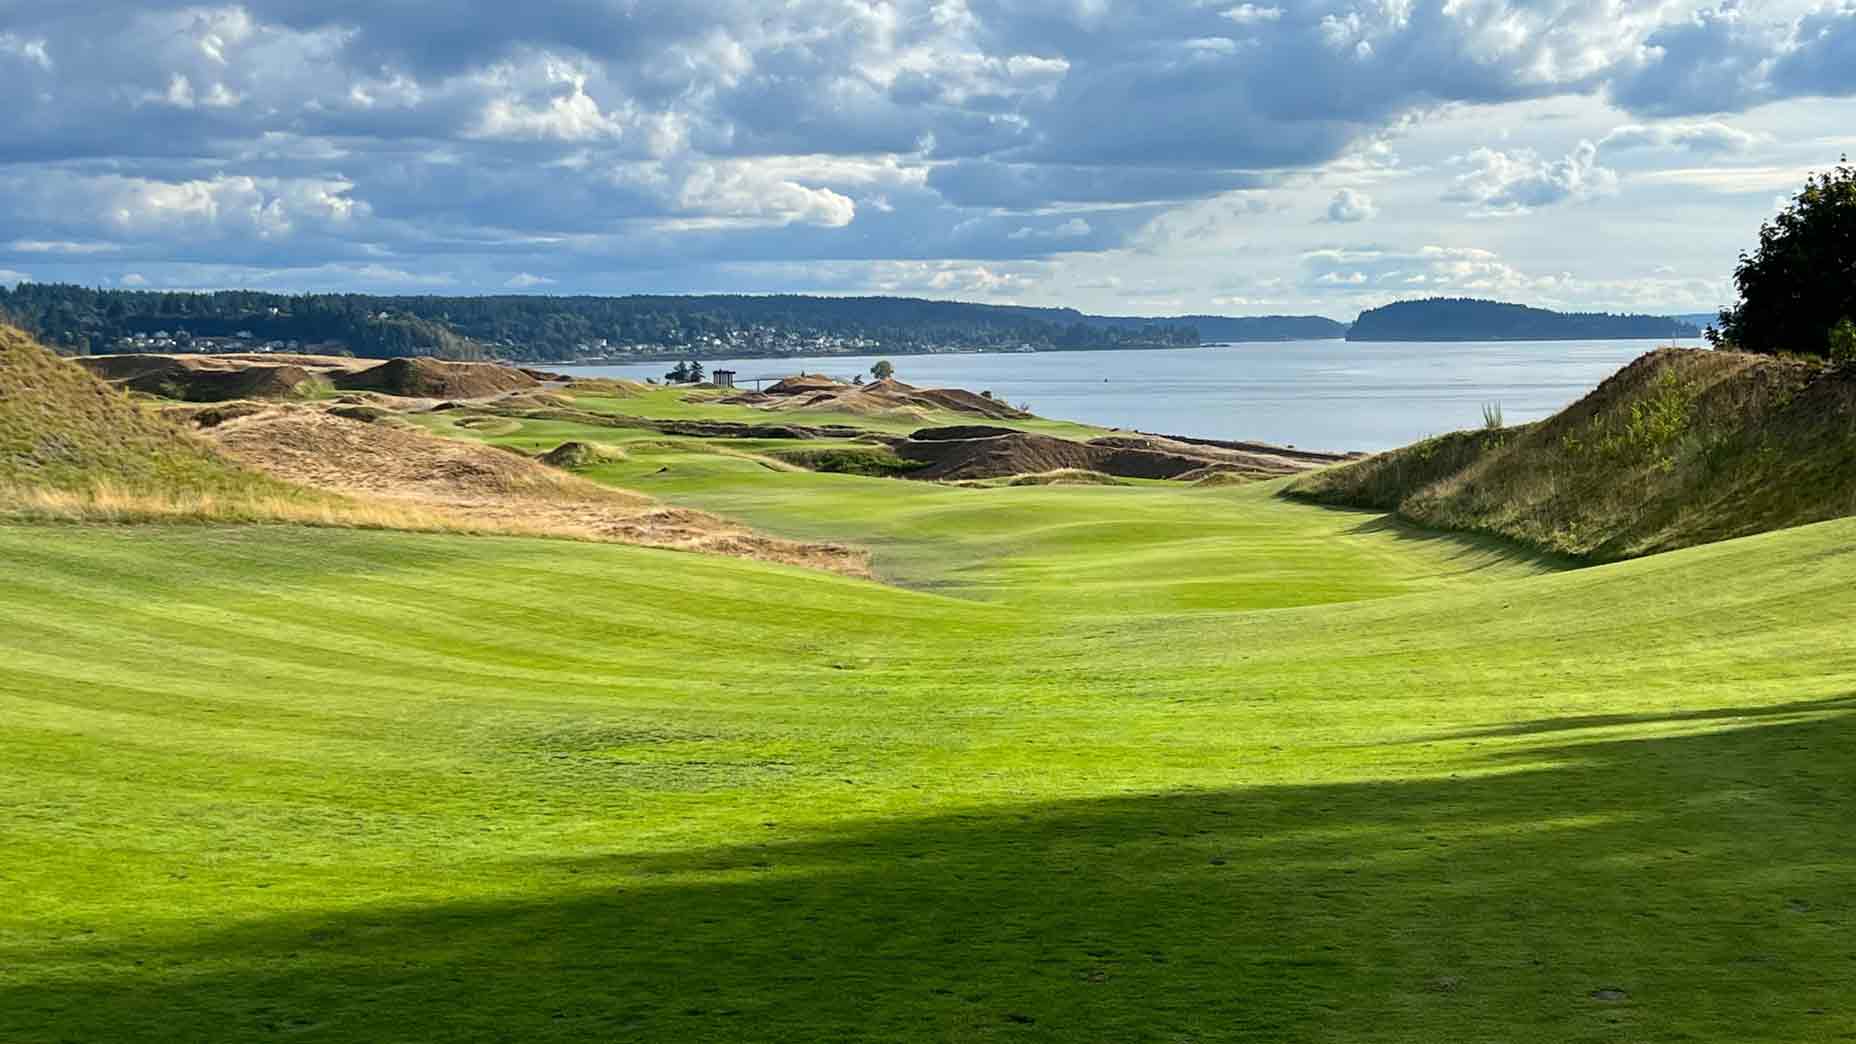 What's it like to play Chambers Bay?